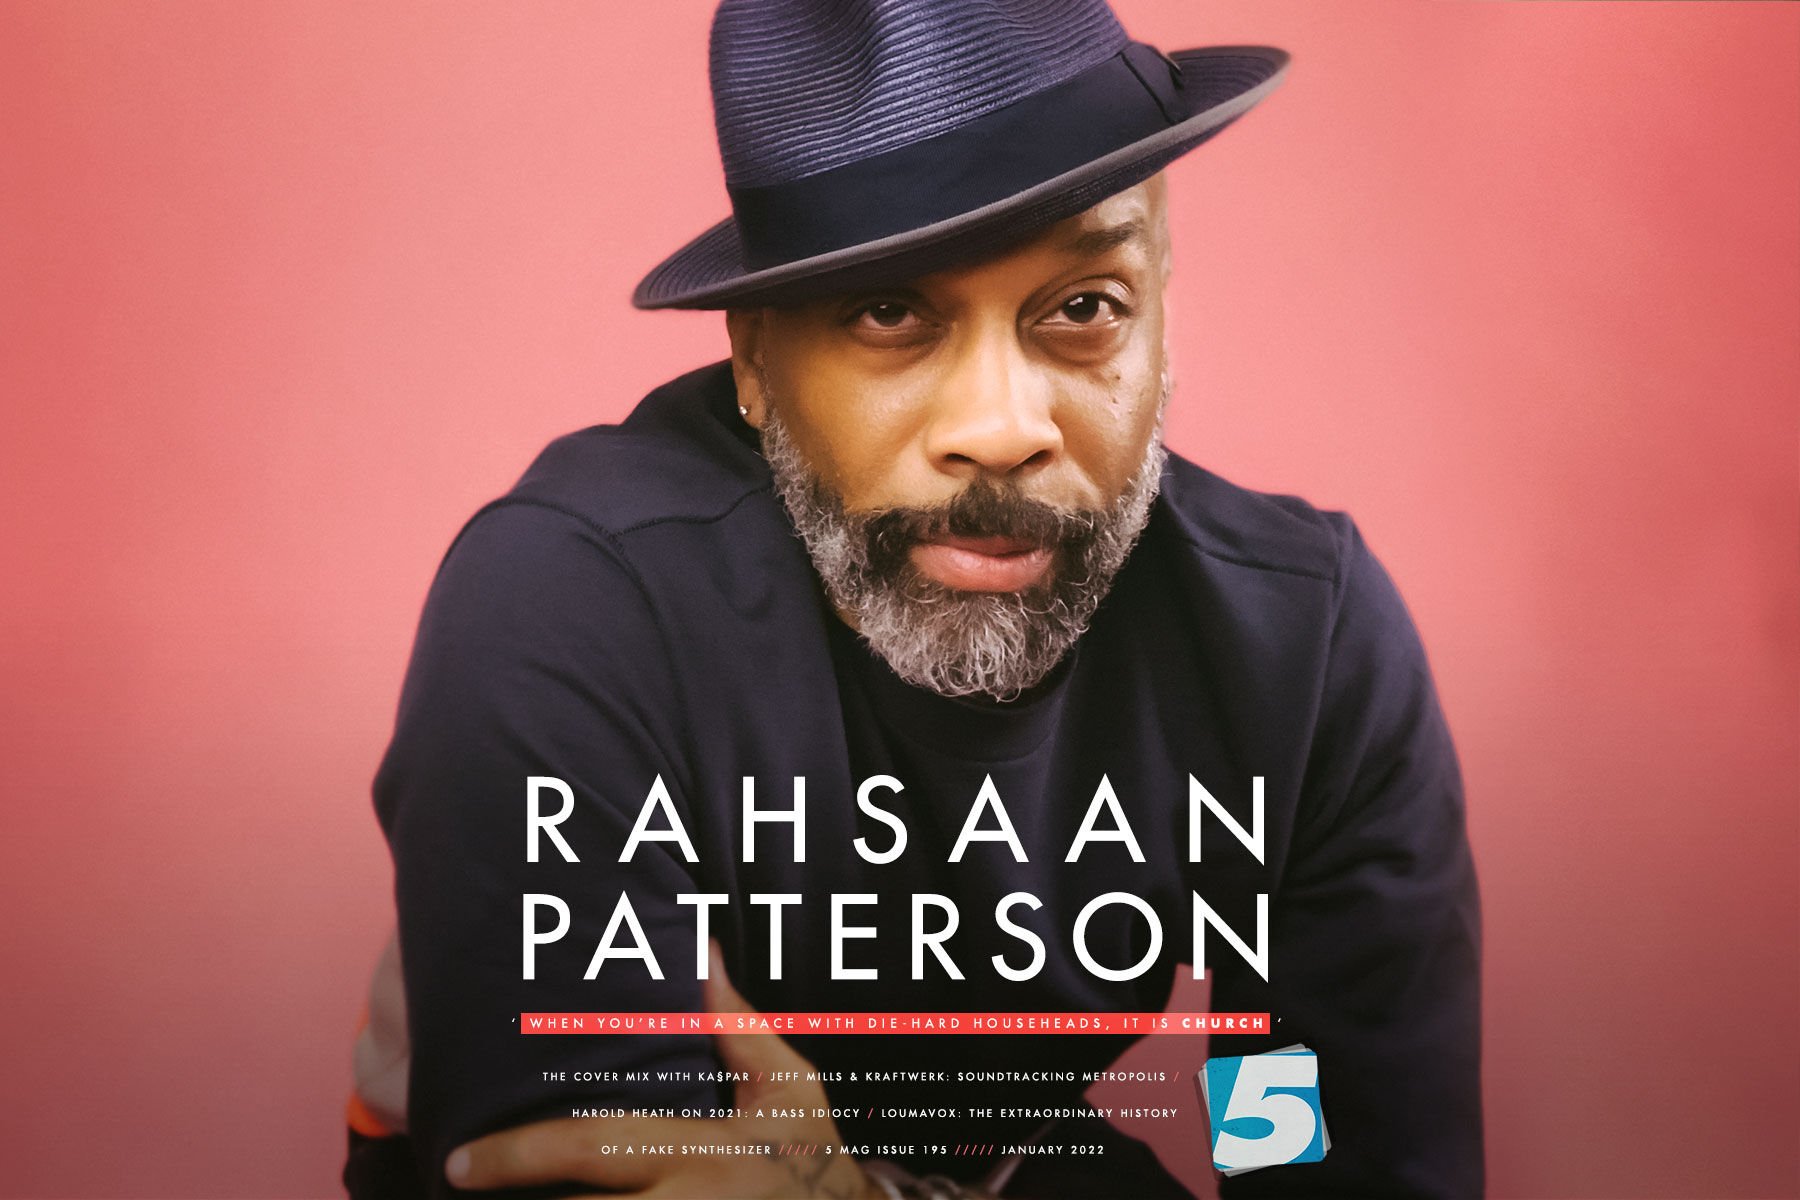 5 Mag Issue 195 with Rahsaan Patterson